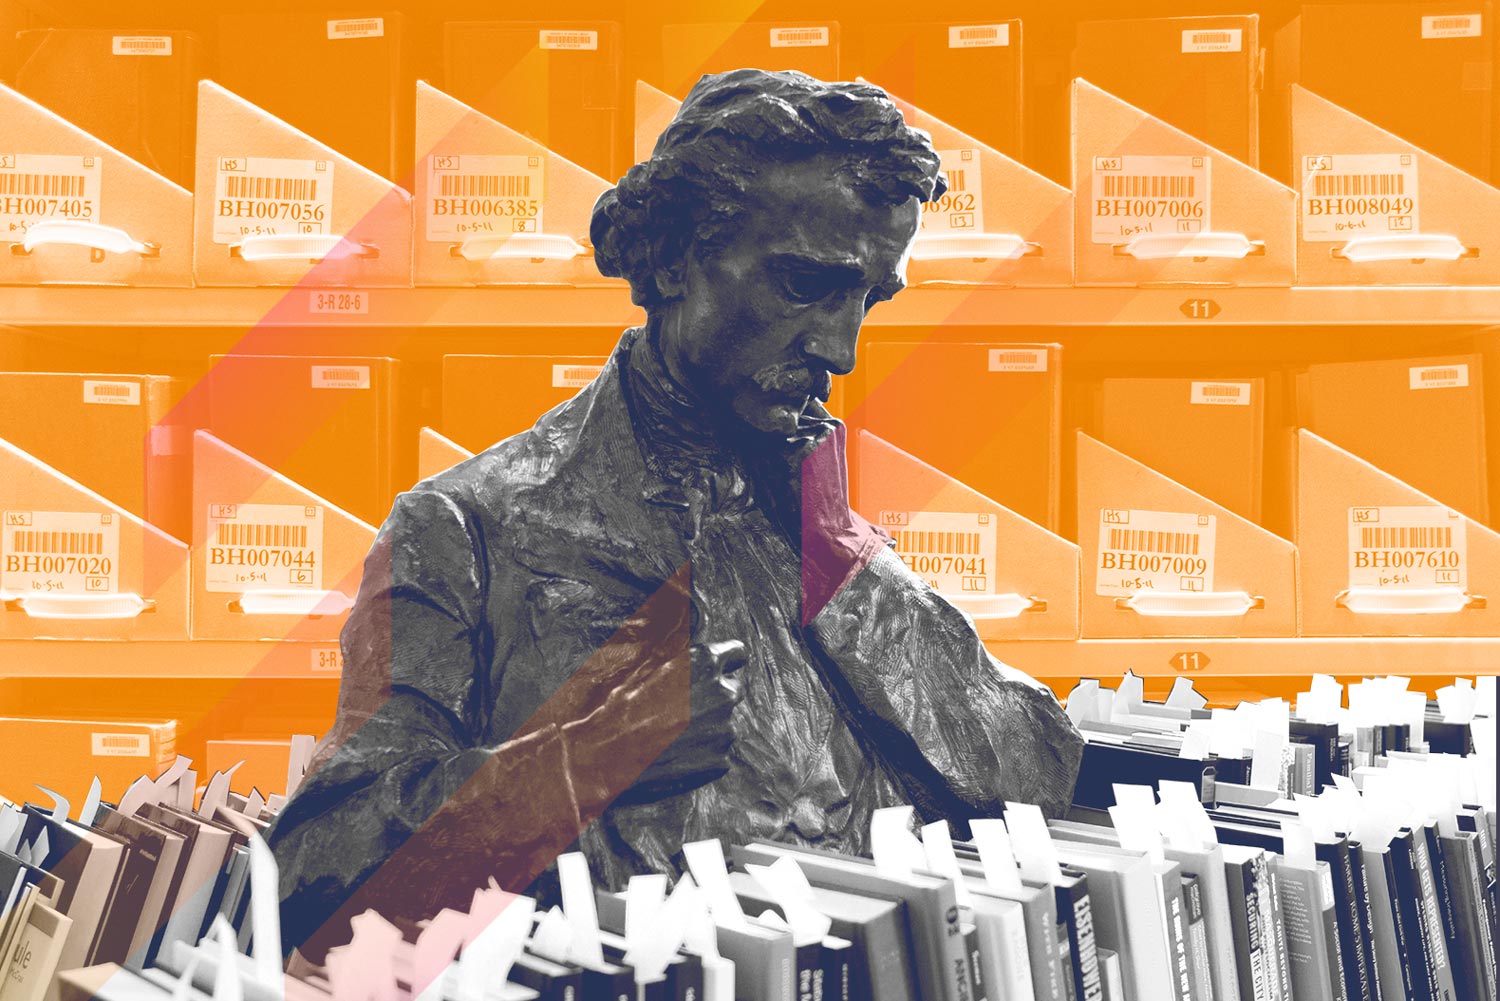 Collage of a statue on books